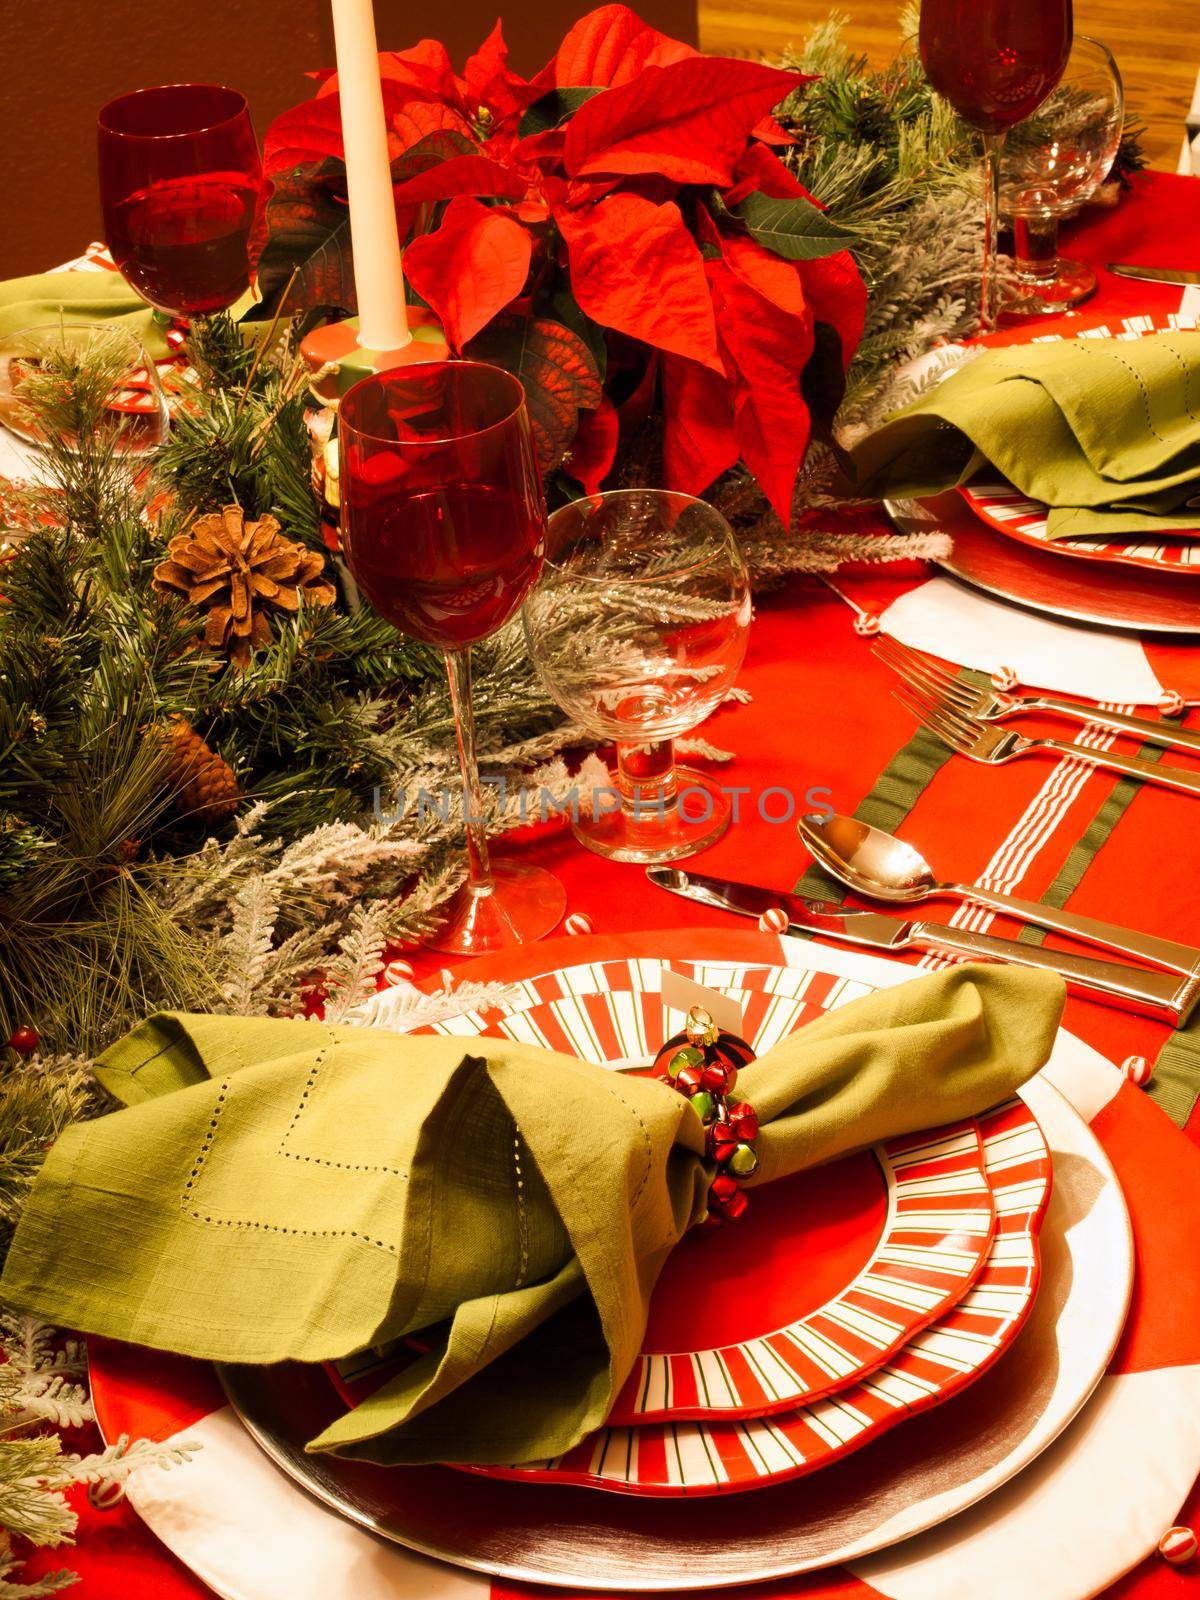 A table set for a holiday meal.